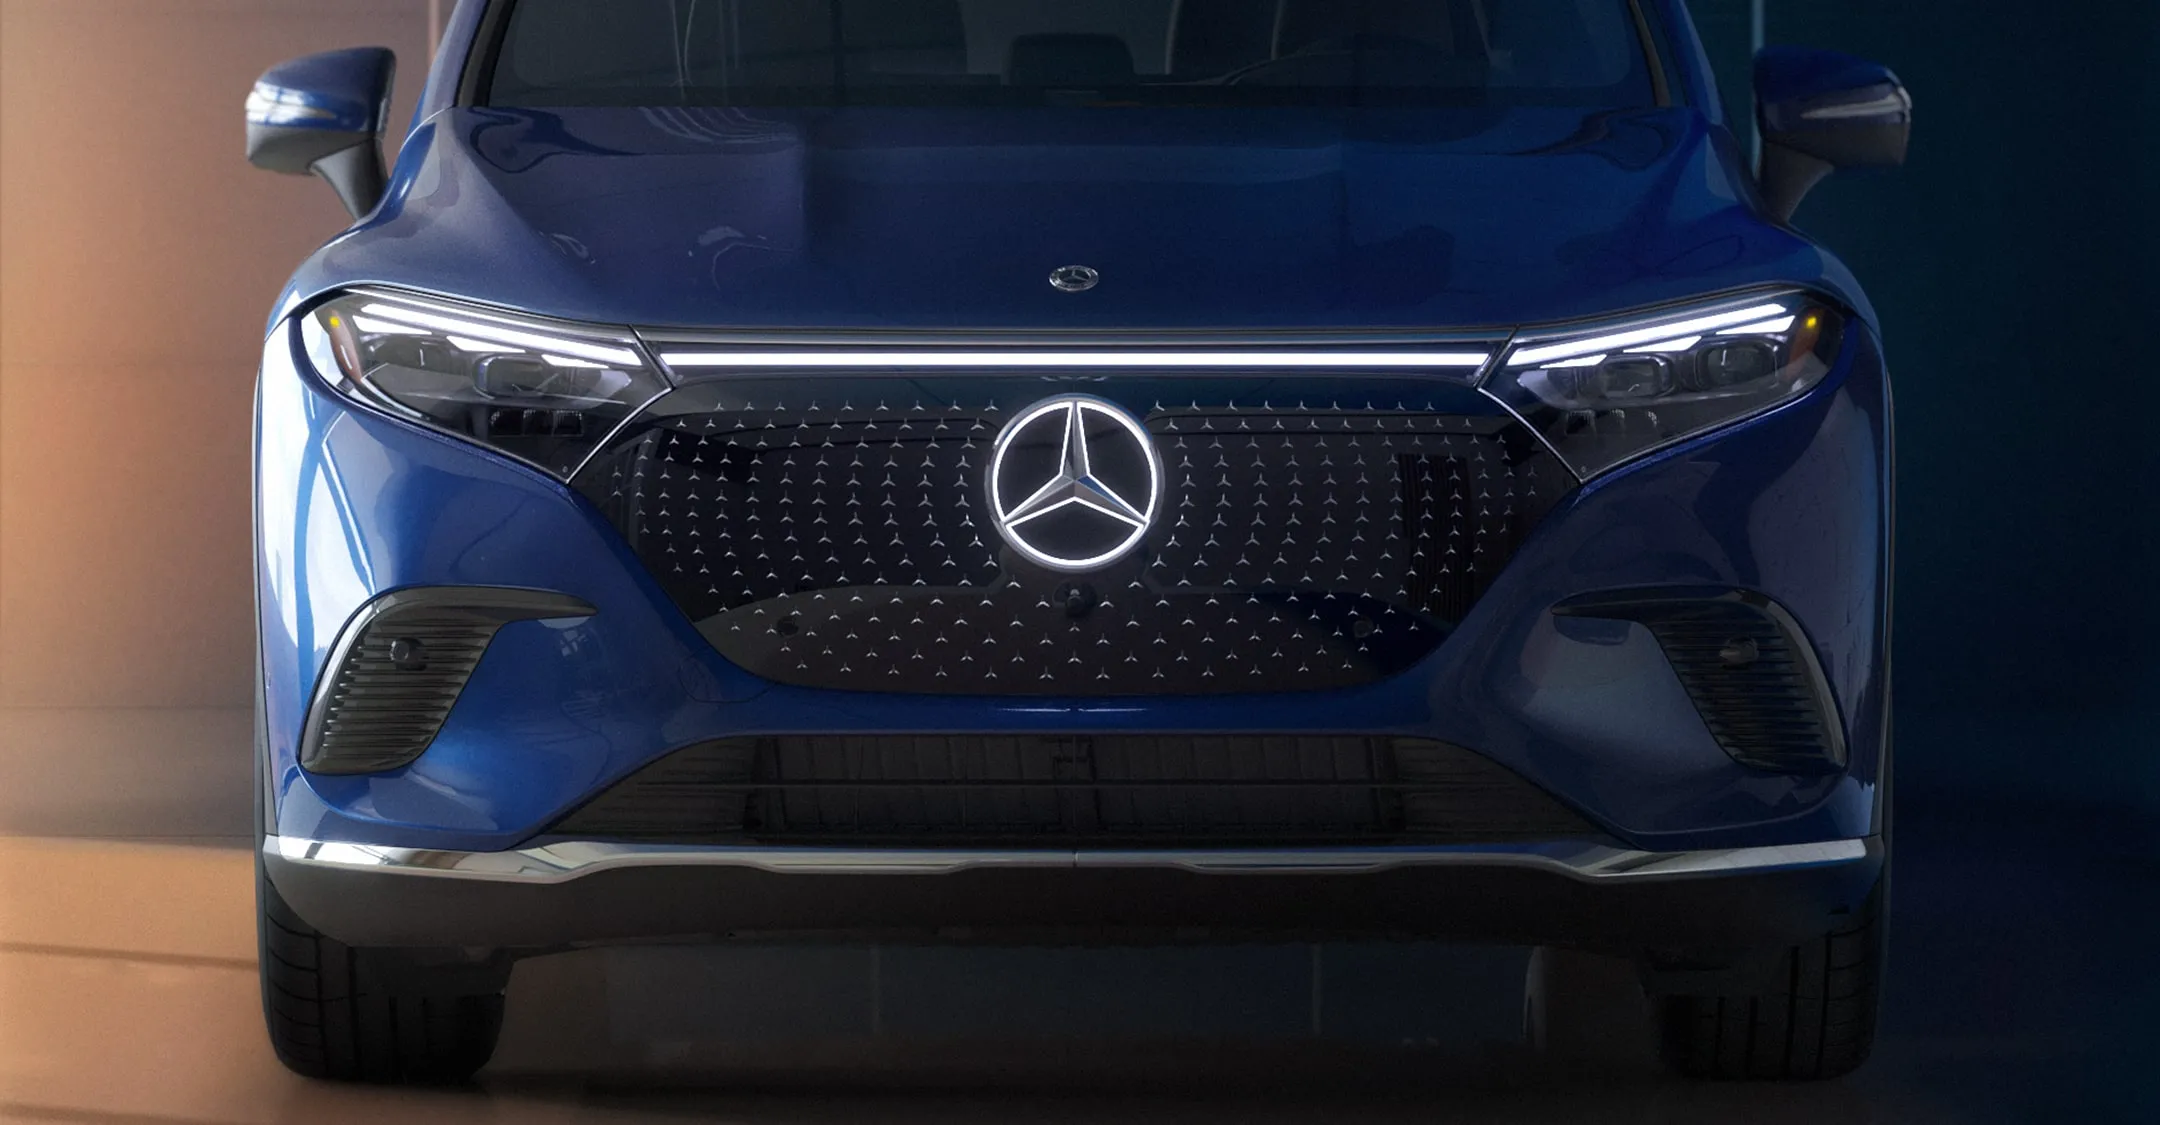 The Price Point of Mercedes EQS SUV